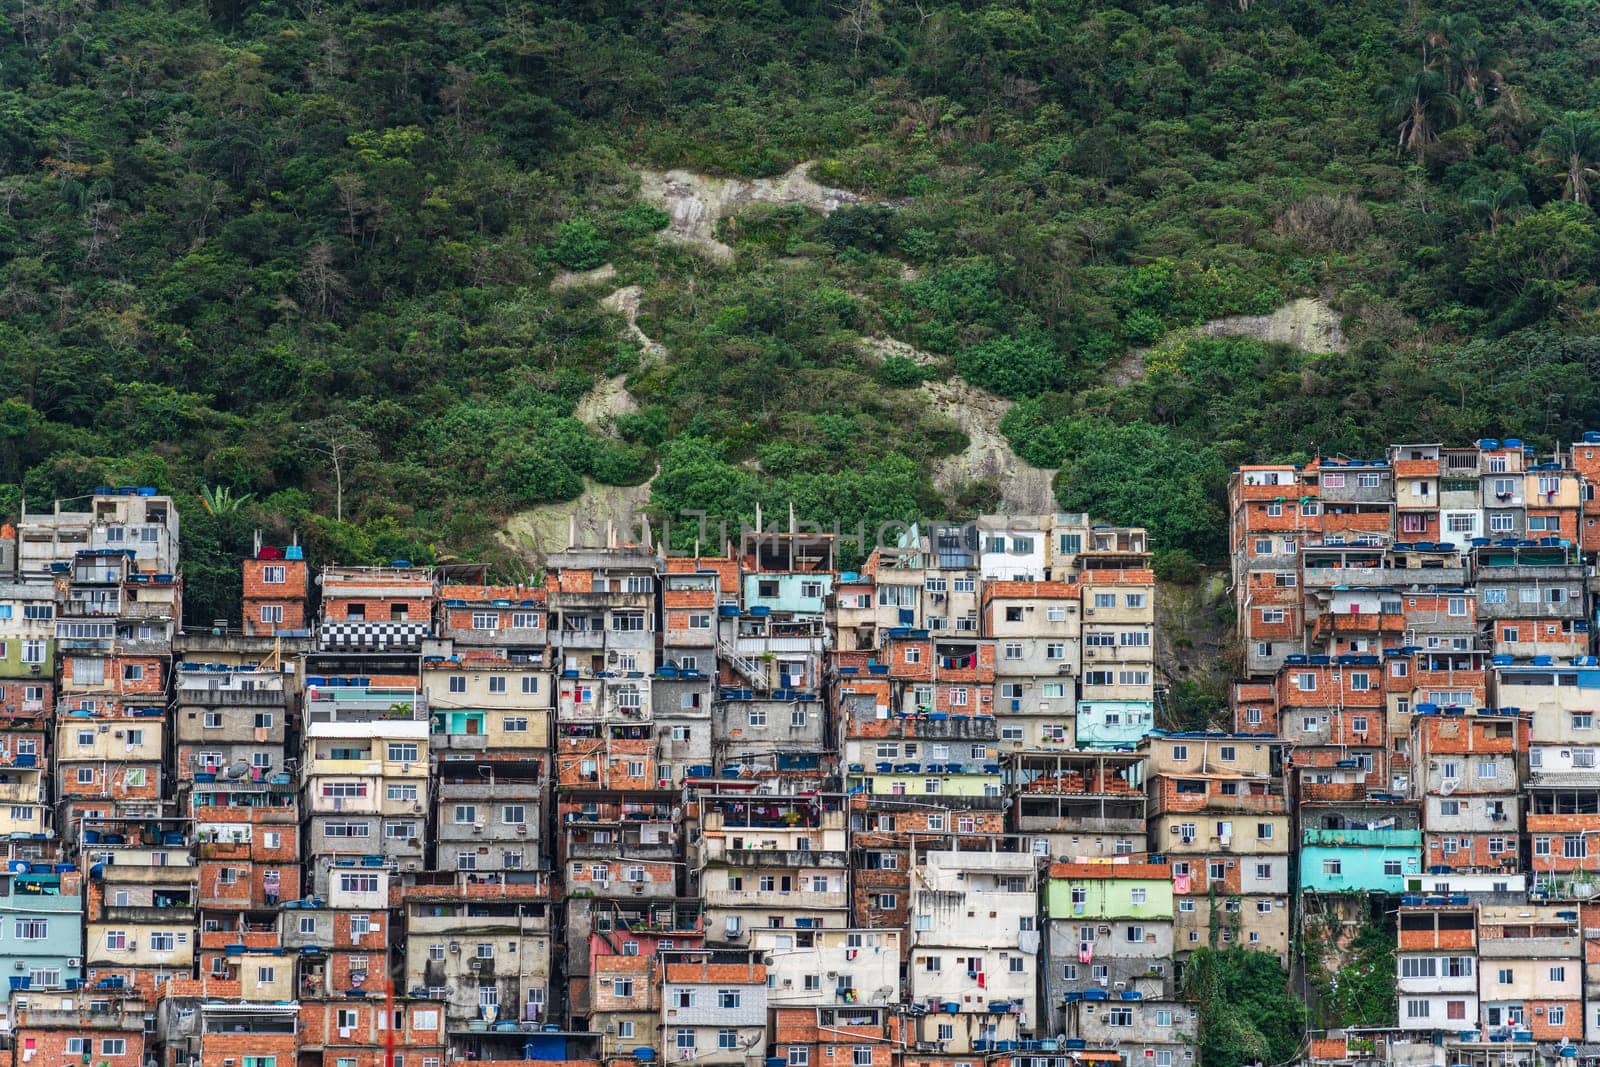 Picturesque favela houses climb a hill, exposing the depth of city poverty.